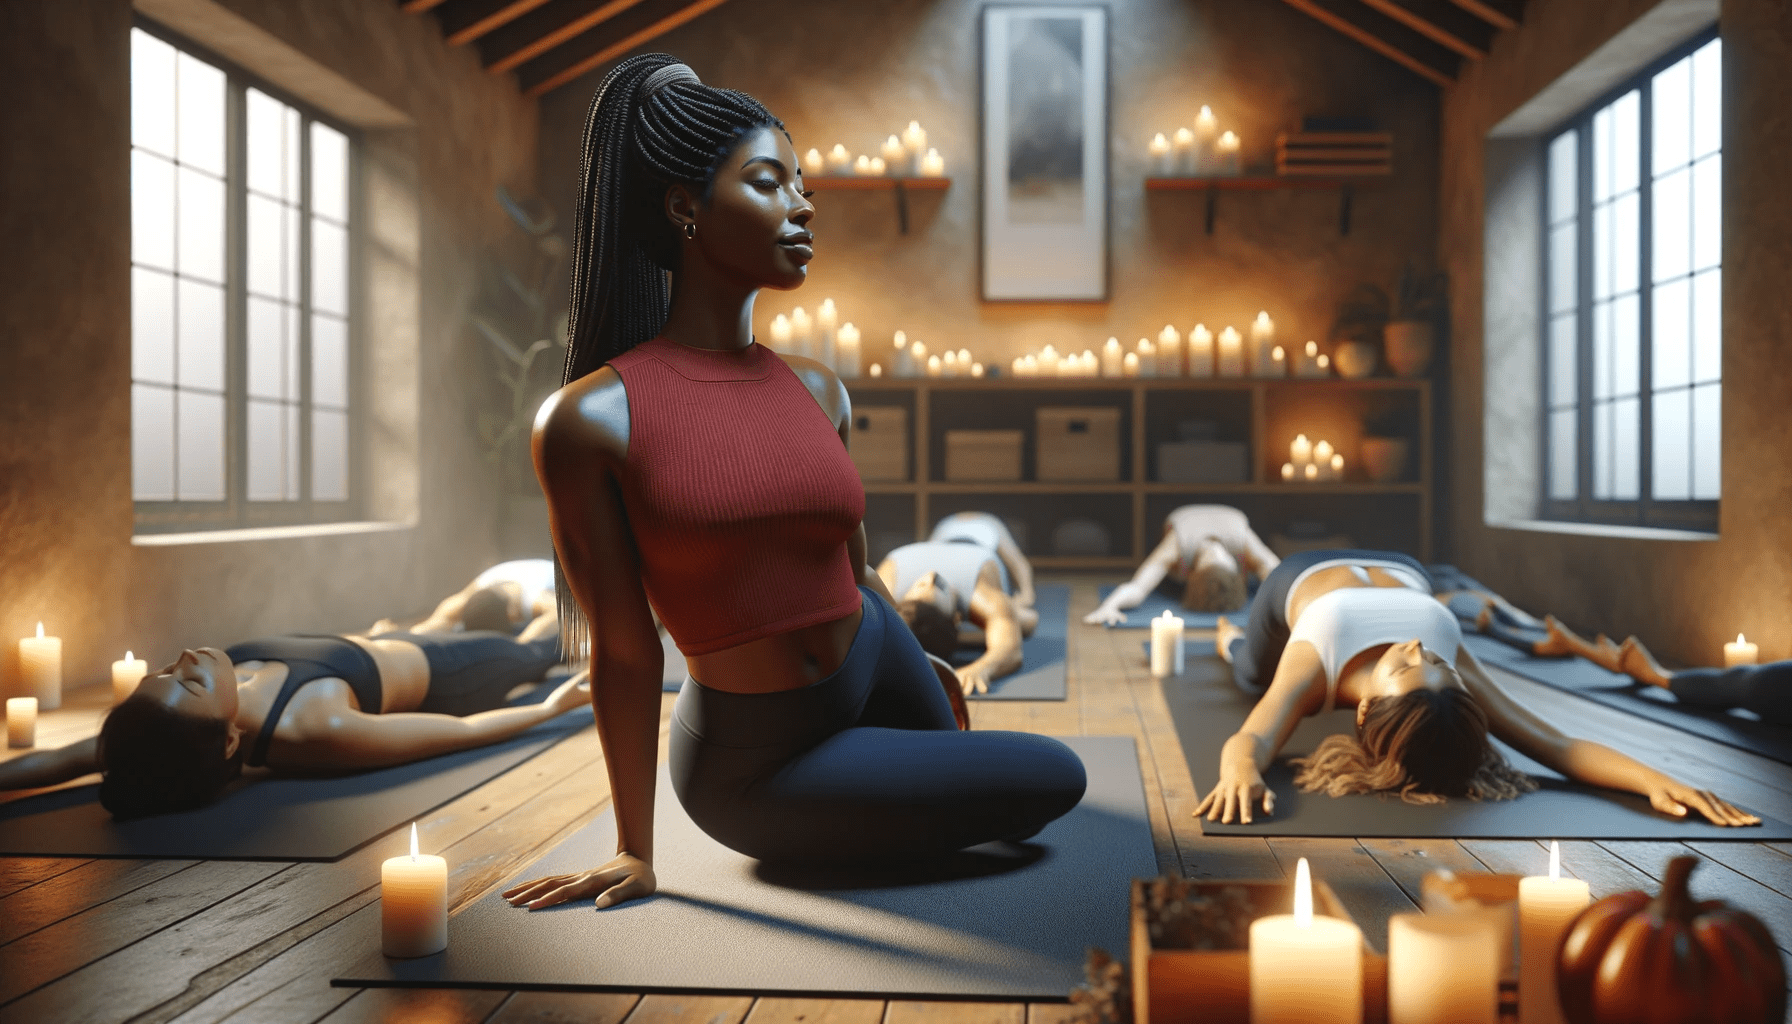 image-of-a-female-yoga-instructor-teaching-a-relaxation-pose-in-a-cozy-candle-lit-studio.-The-instructor-is-a-Black-woman-in-her-40s